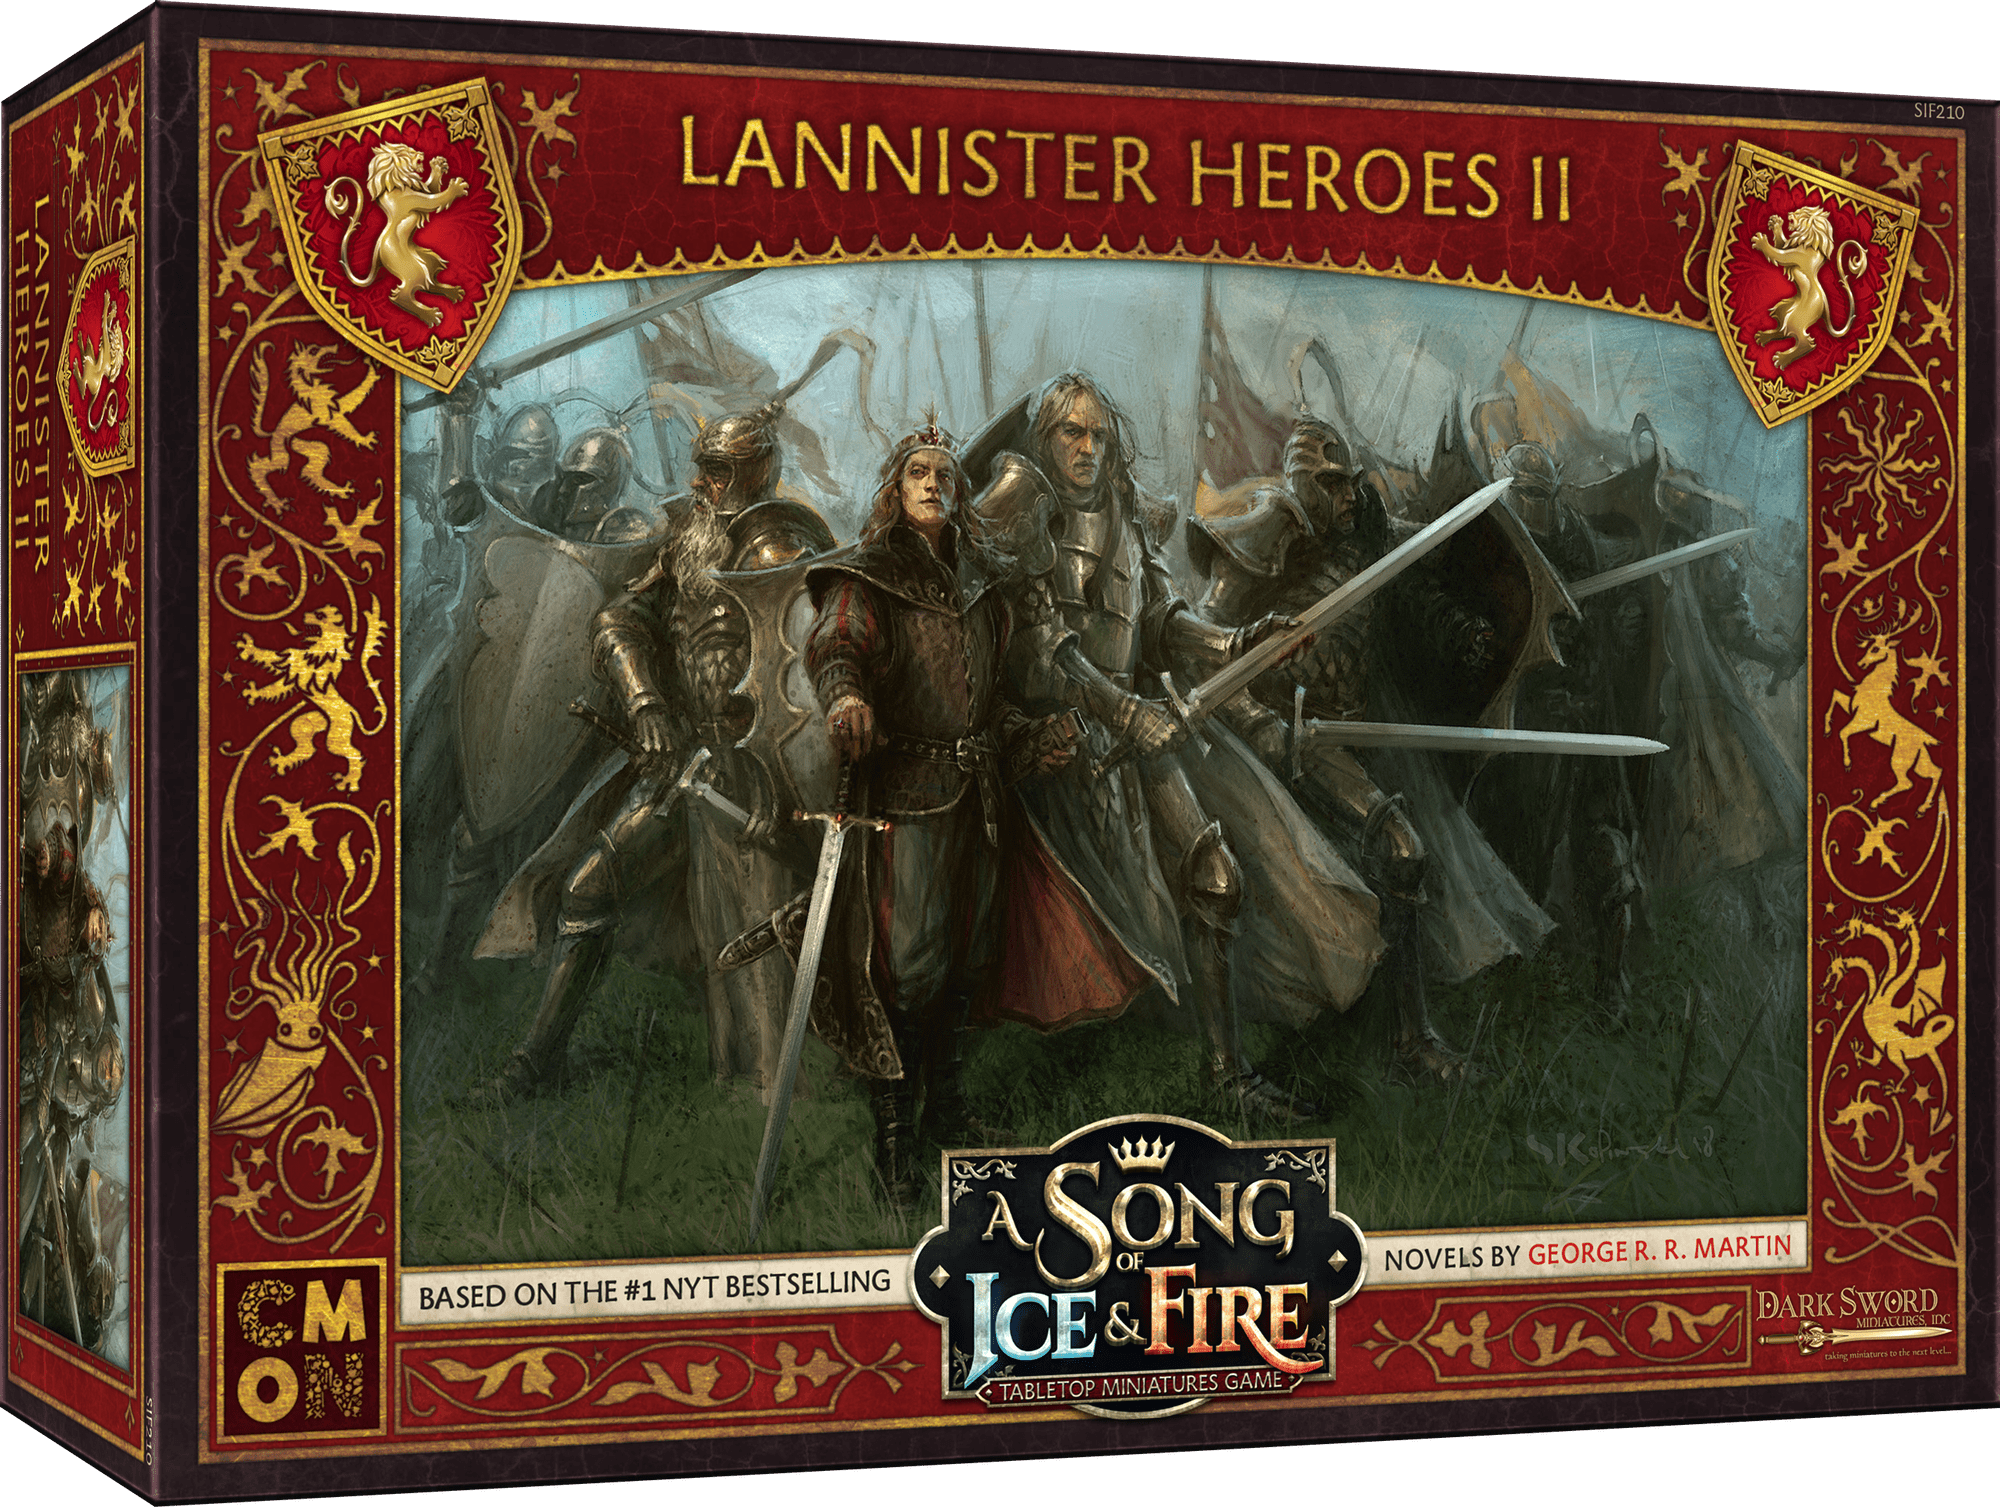 A Song of Ice & Fire: Tabletop Miniatures Game – Lannister Heroes II